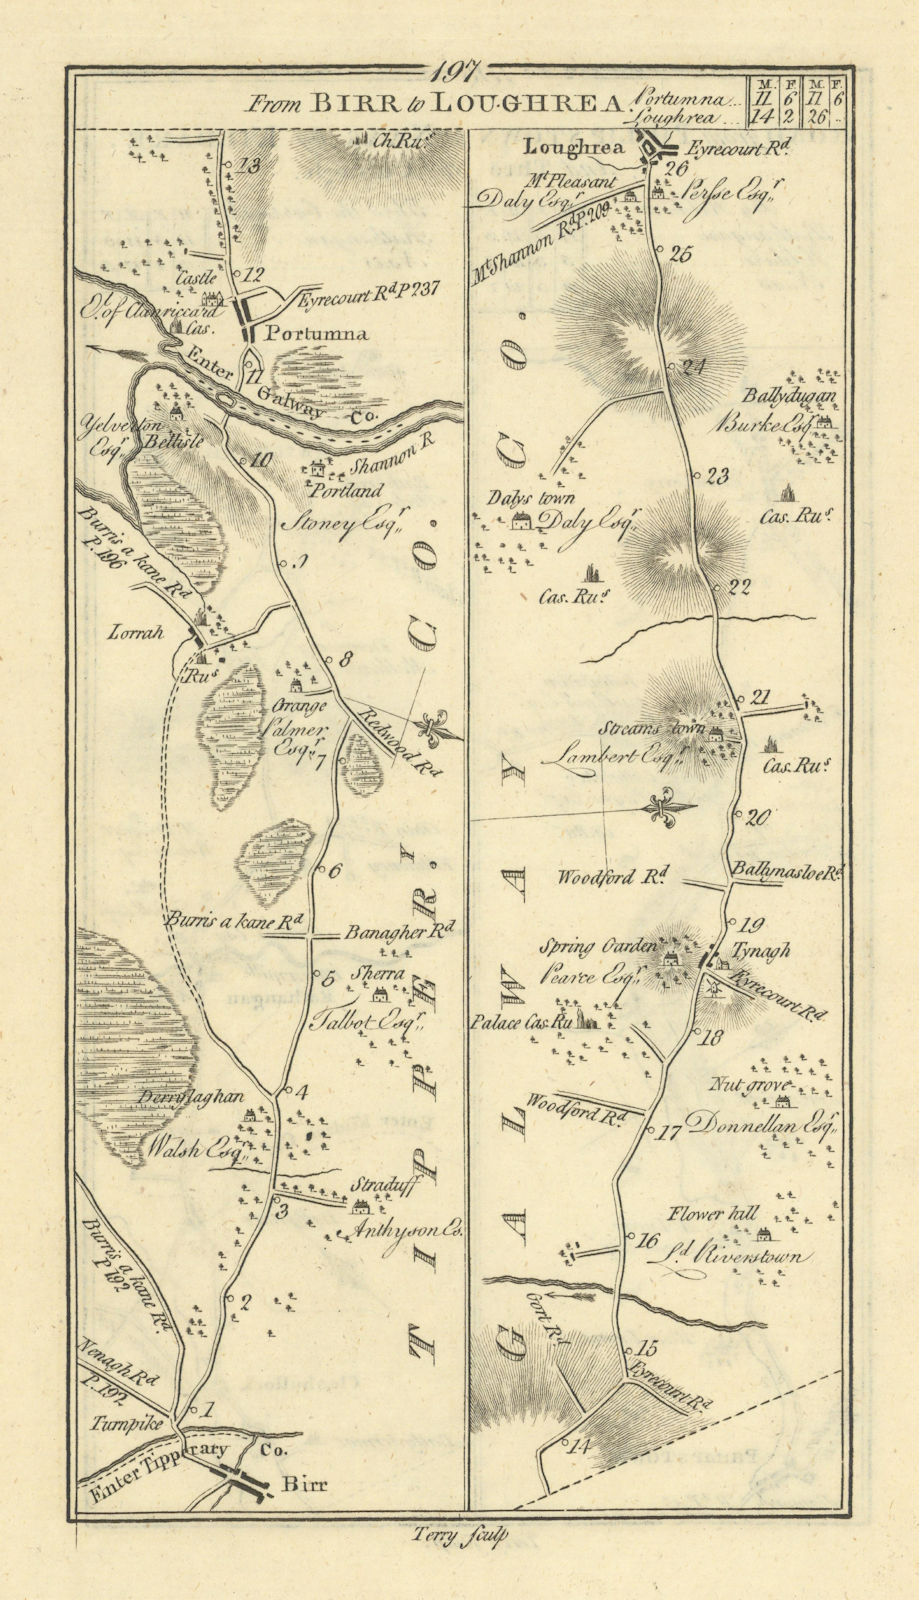 Associate Product #197 From Birr to Loughrea. Portumna Galway Offaly. TAYLOR/SKINNER 1778 map